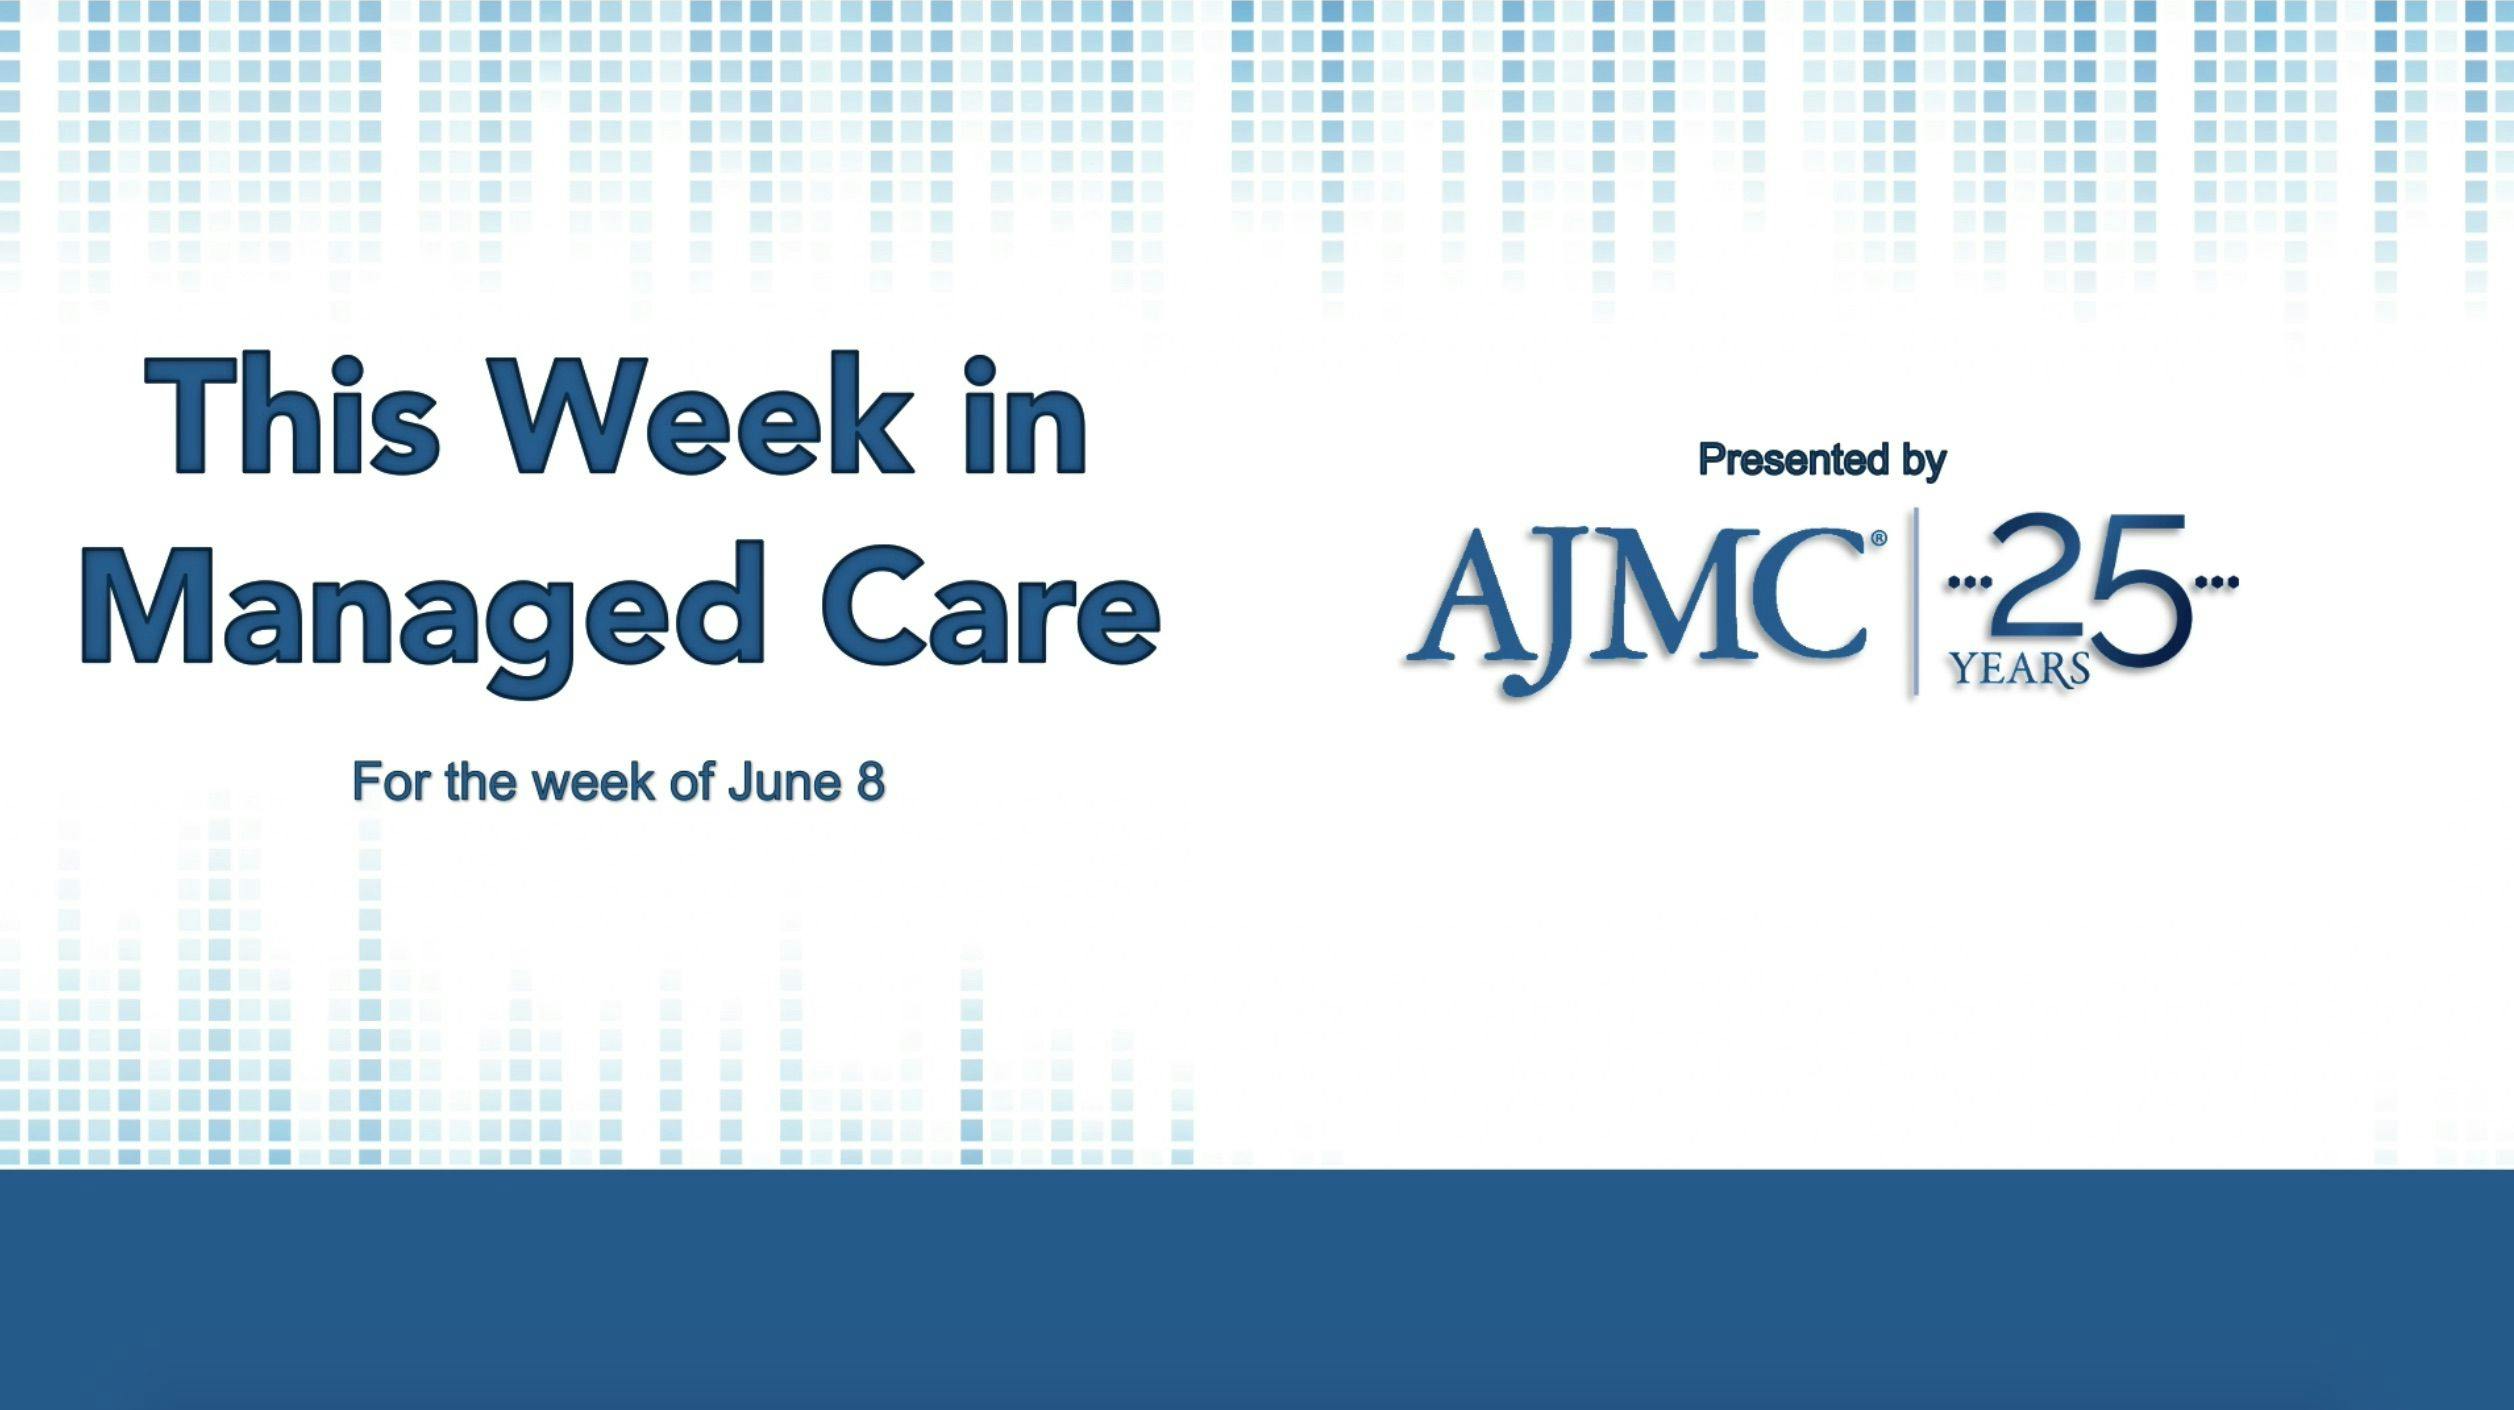 This Week in Managed Care: June 12, 2020